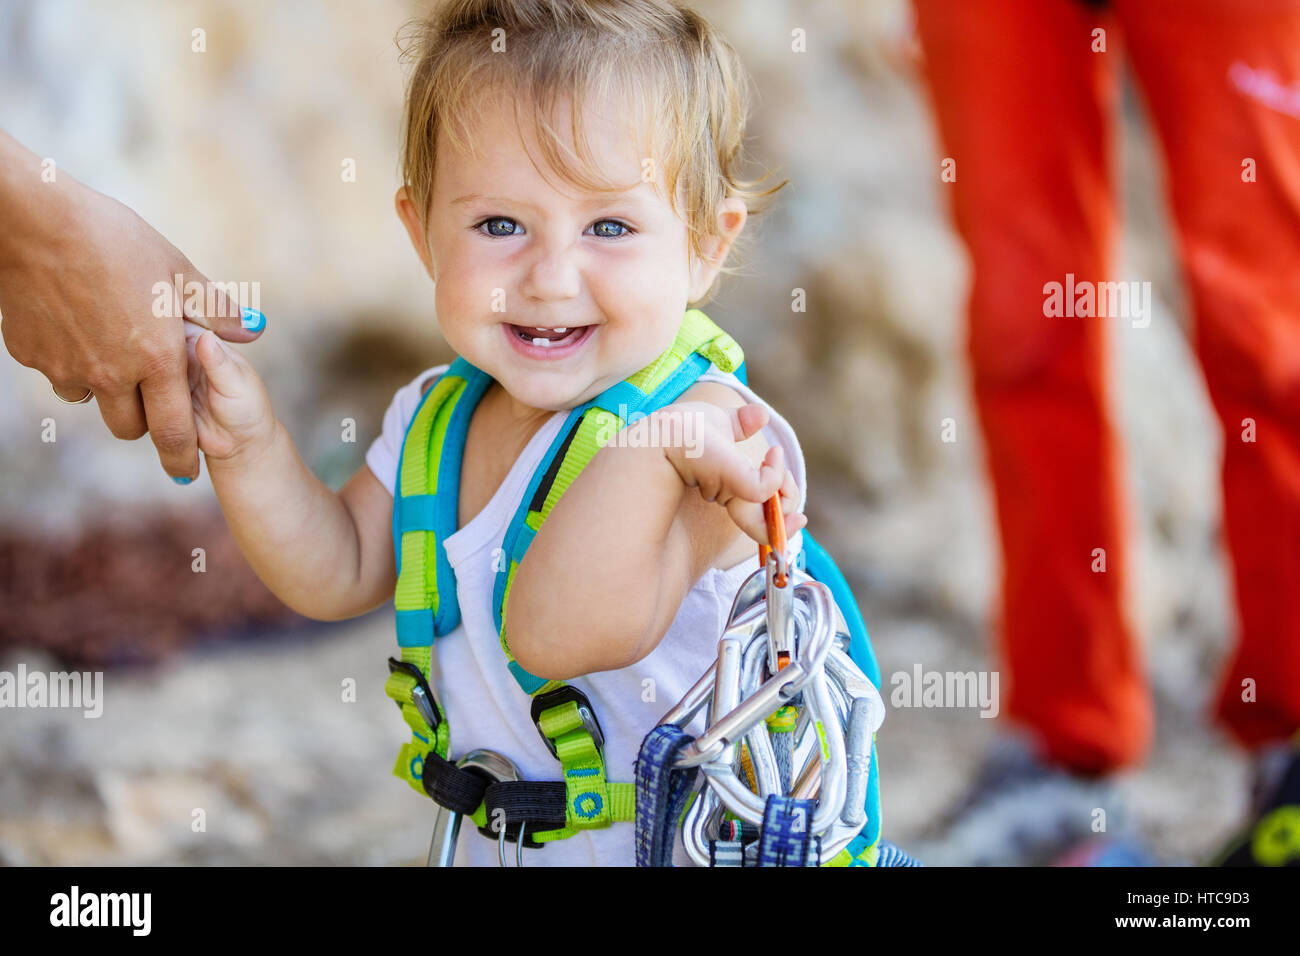 Happy little girl Playing with rock matériel d'escalade et holding mother's hand Banque D'Images